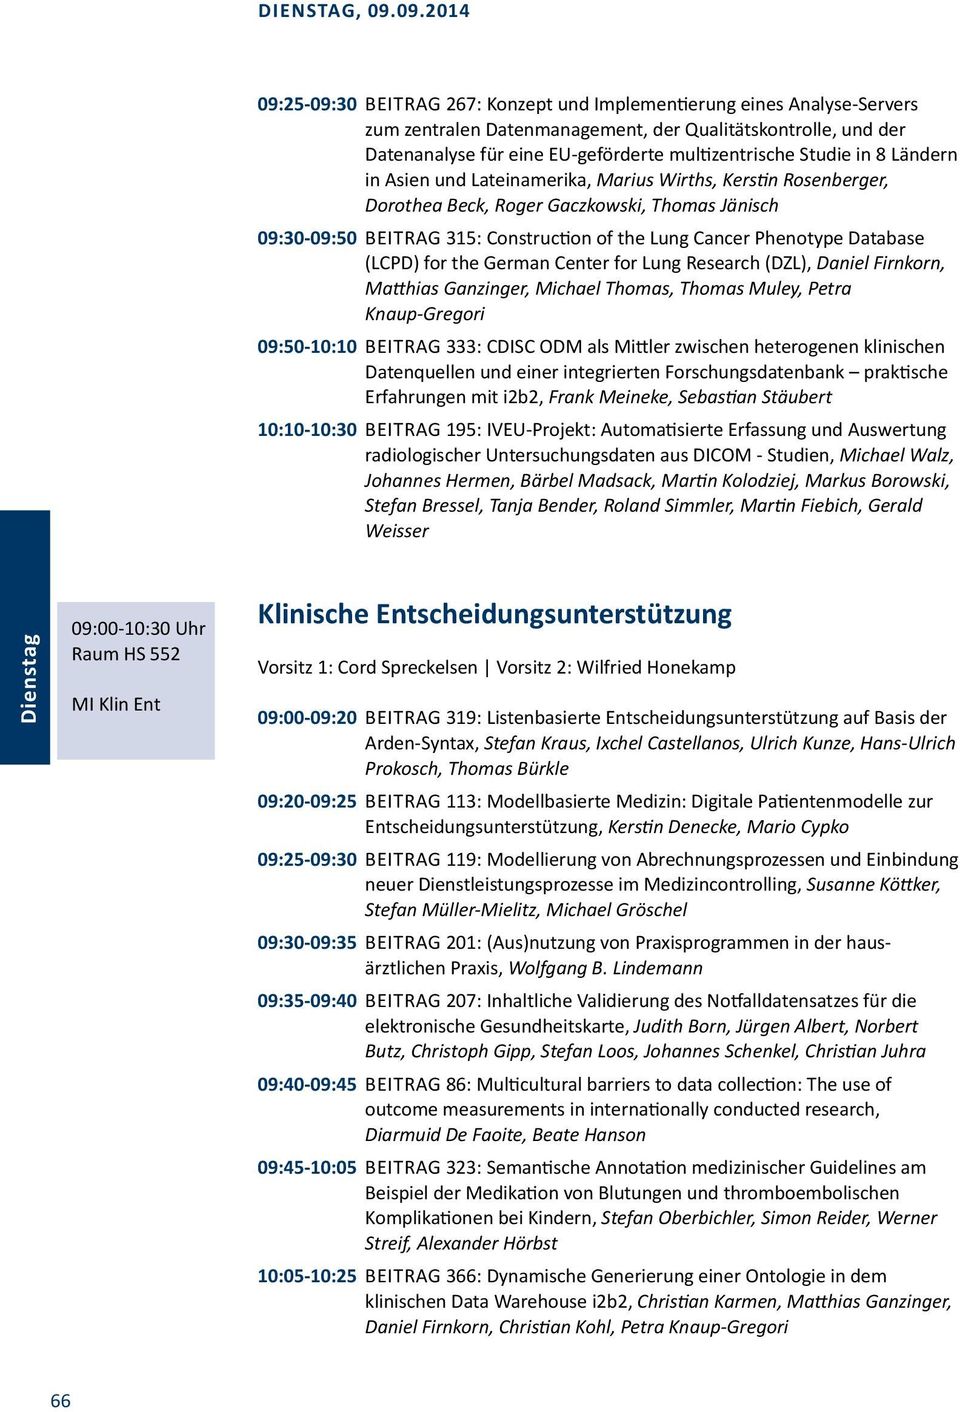 Cancer Phenotype Database (LCPD) for the German Center for Lung Research (DZL), Daniel Firnkorn, Matthias Ganzinger, Michael Thomas, Thomas Muley, Petra Knaup-Gregori 09:50-10:10 Beitrag 333: CDISC